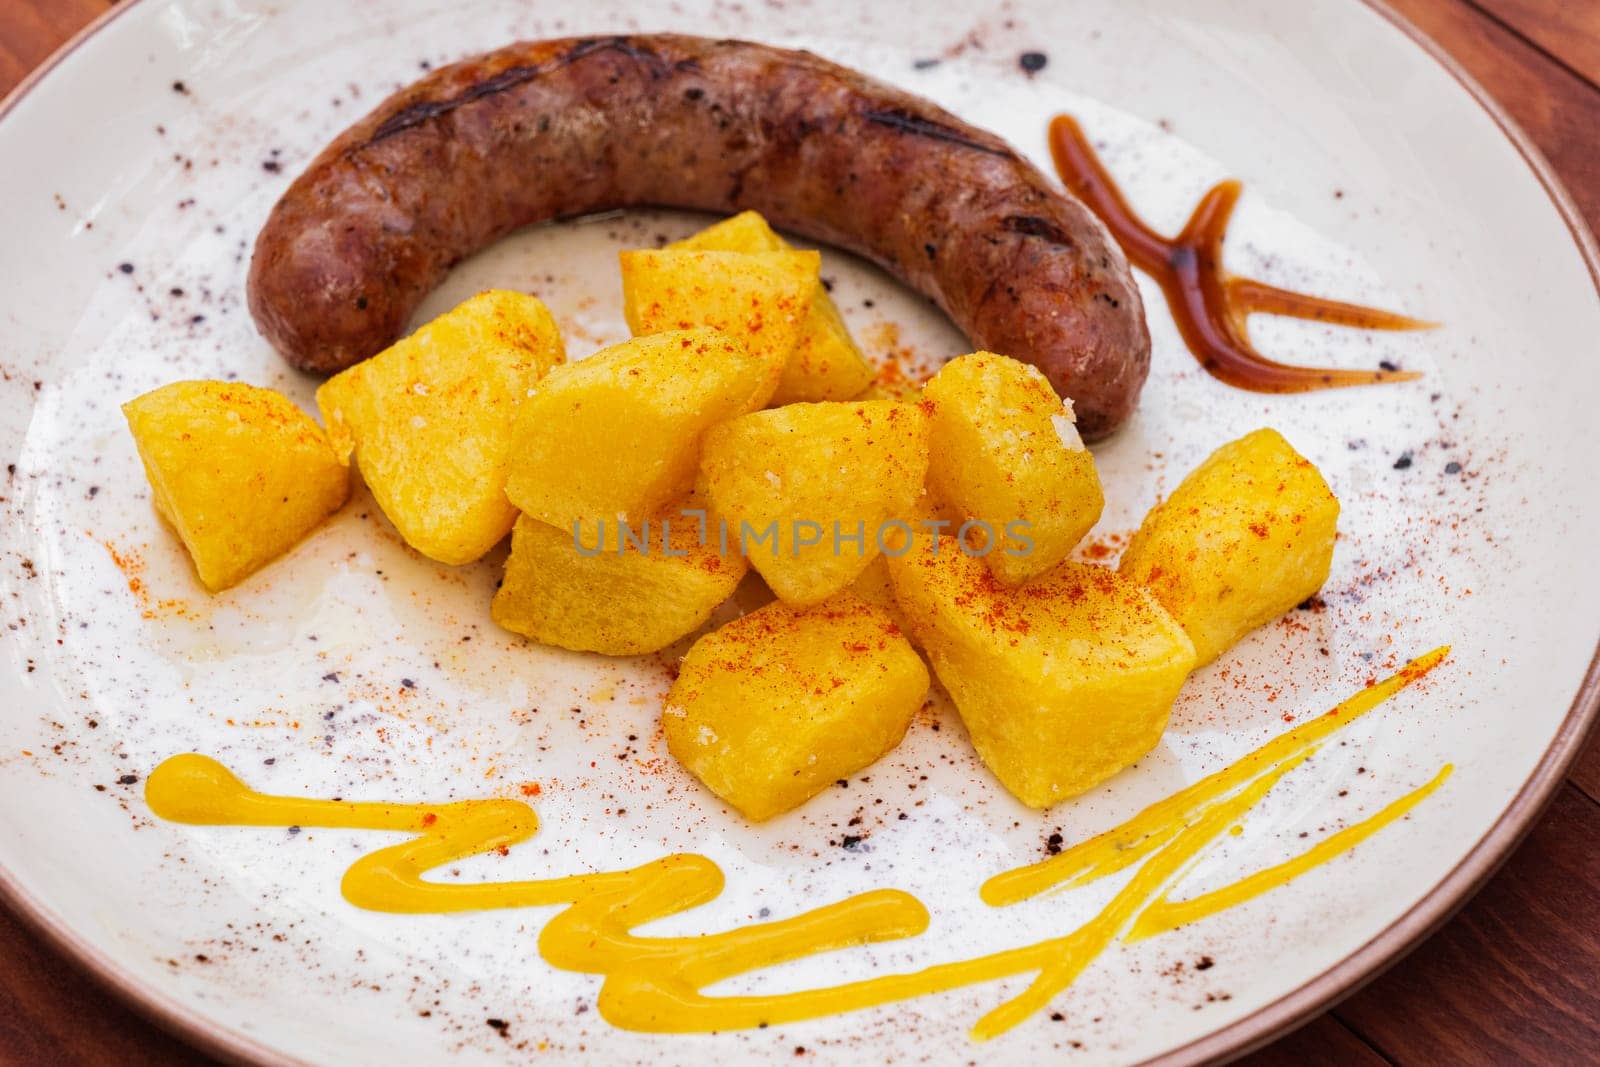 Fried potatoes and treditional spanish pork sausage butifarra with sauces on white plate. by apavlin